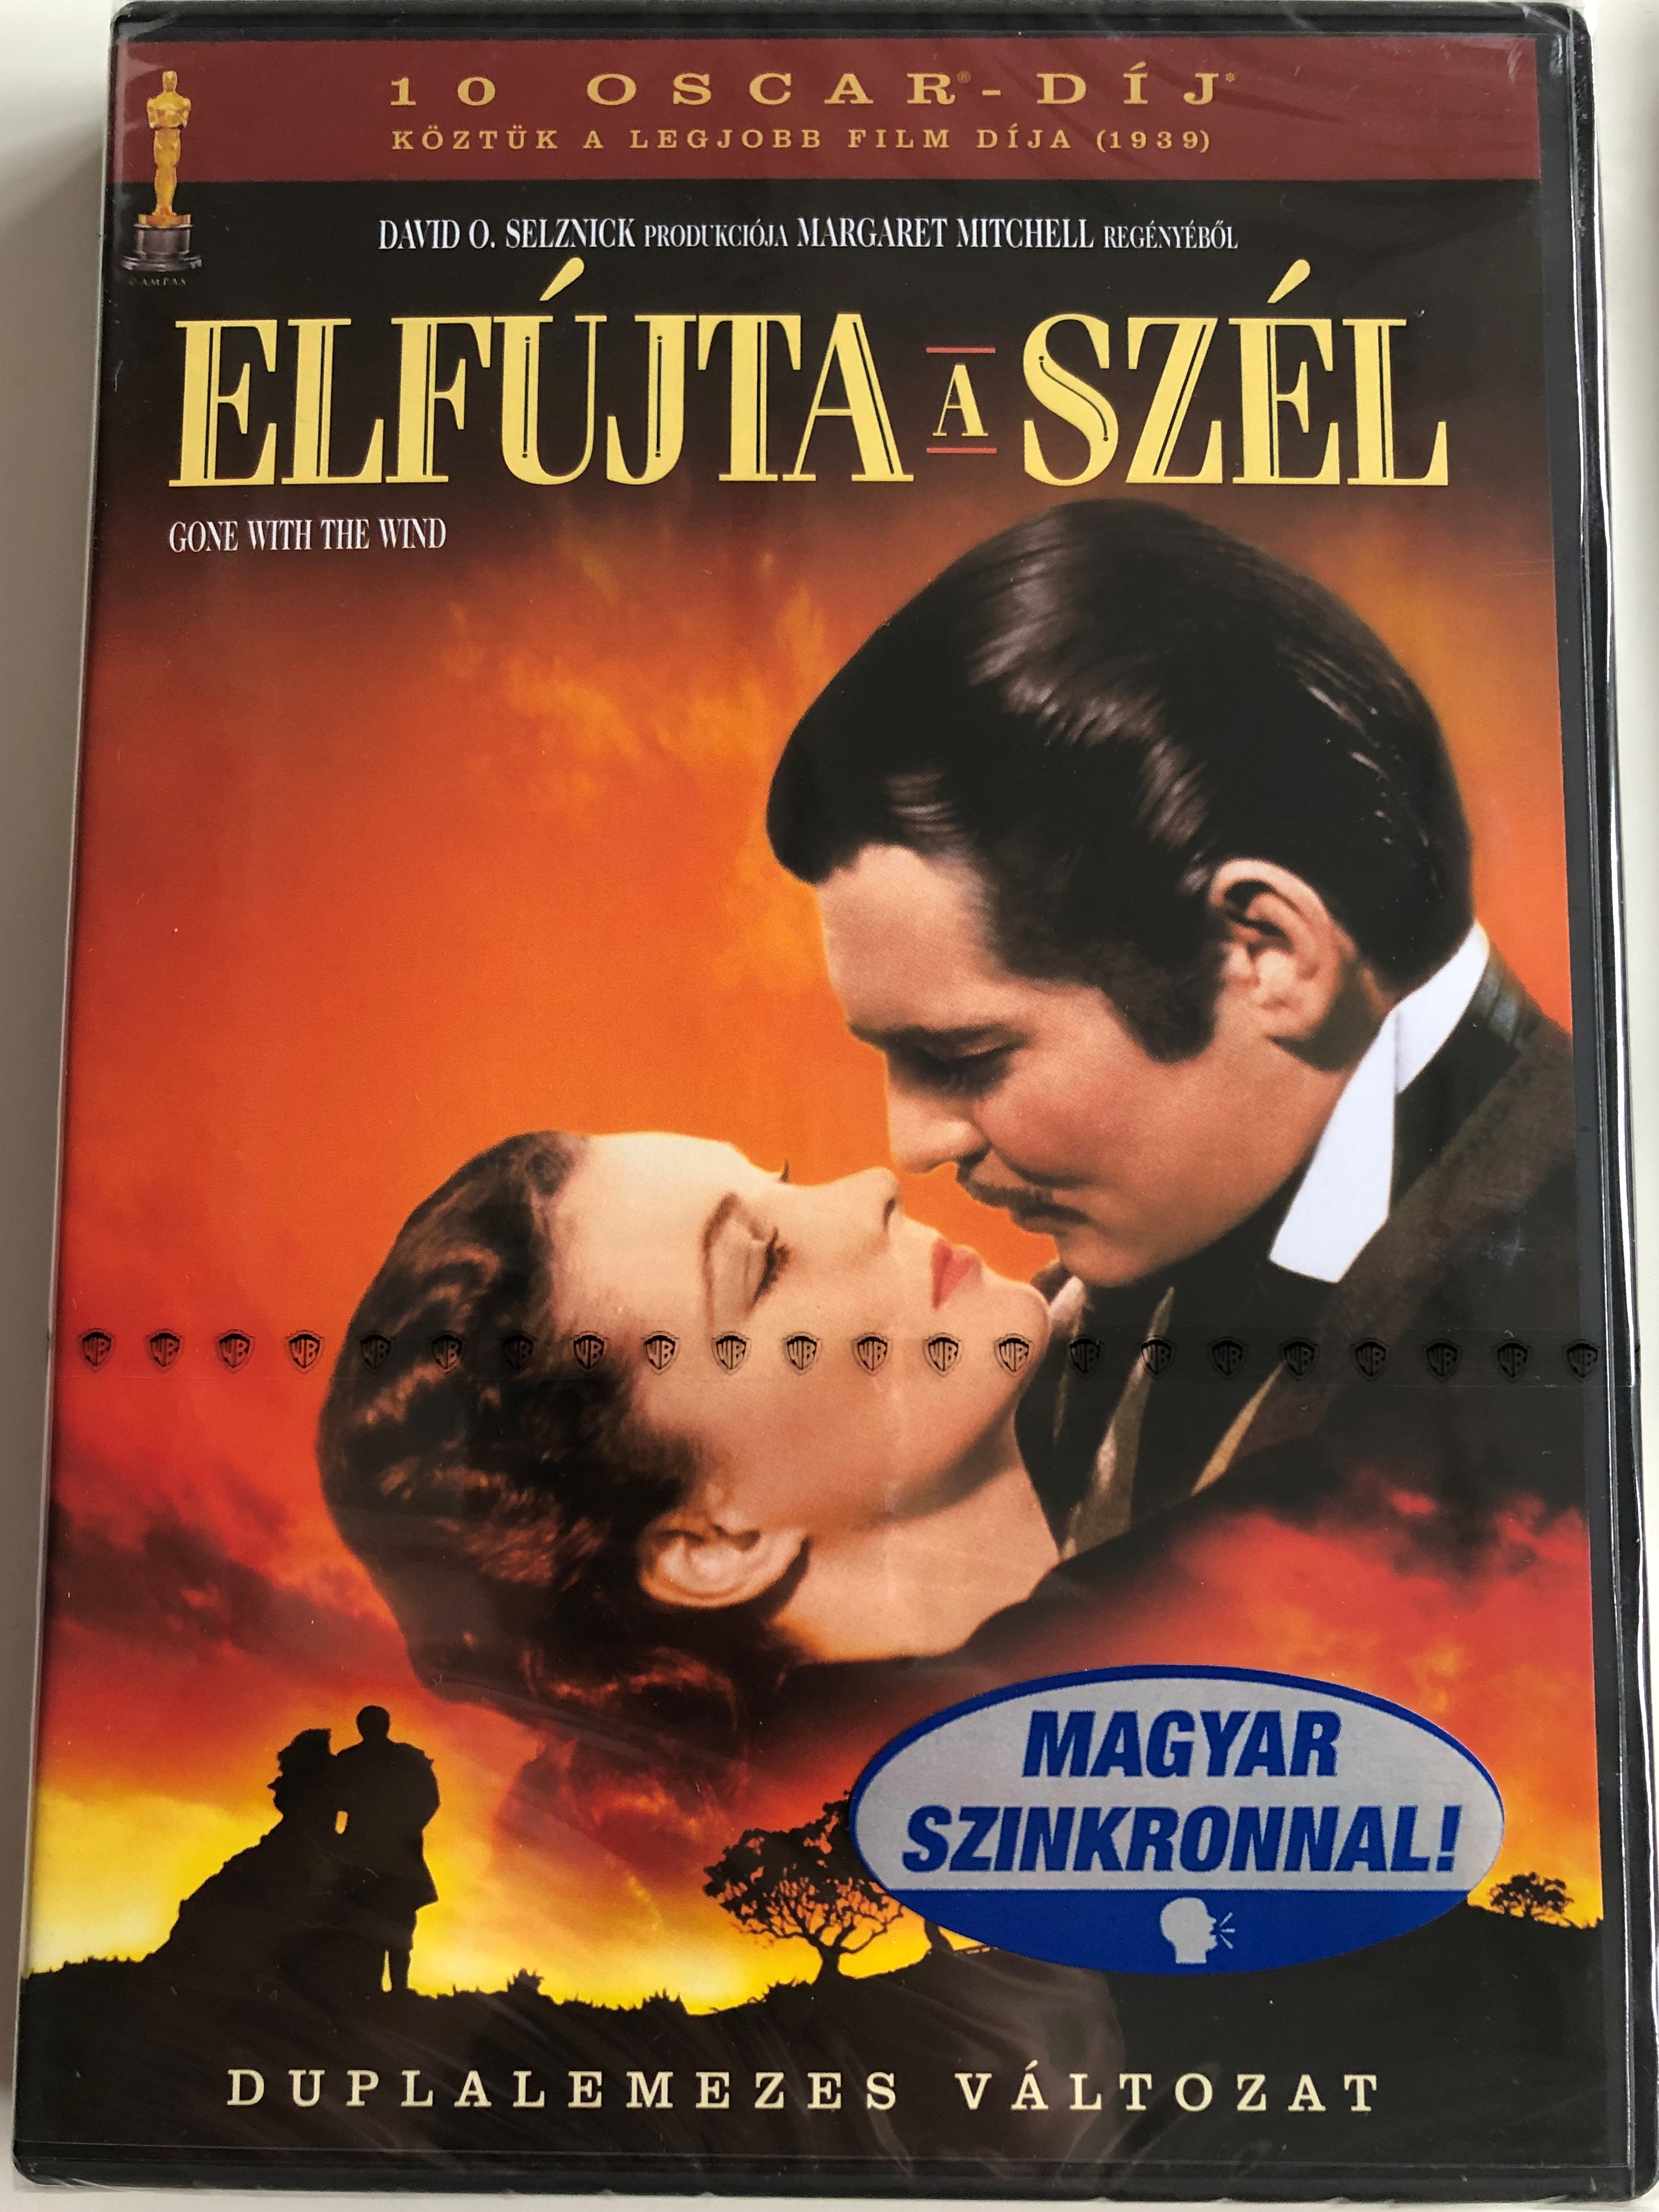 gone-with-the-wind-dvd-1939-elf-jta-a-sz-l-2-disc-edition-1.jpg